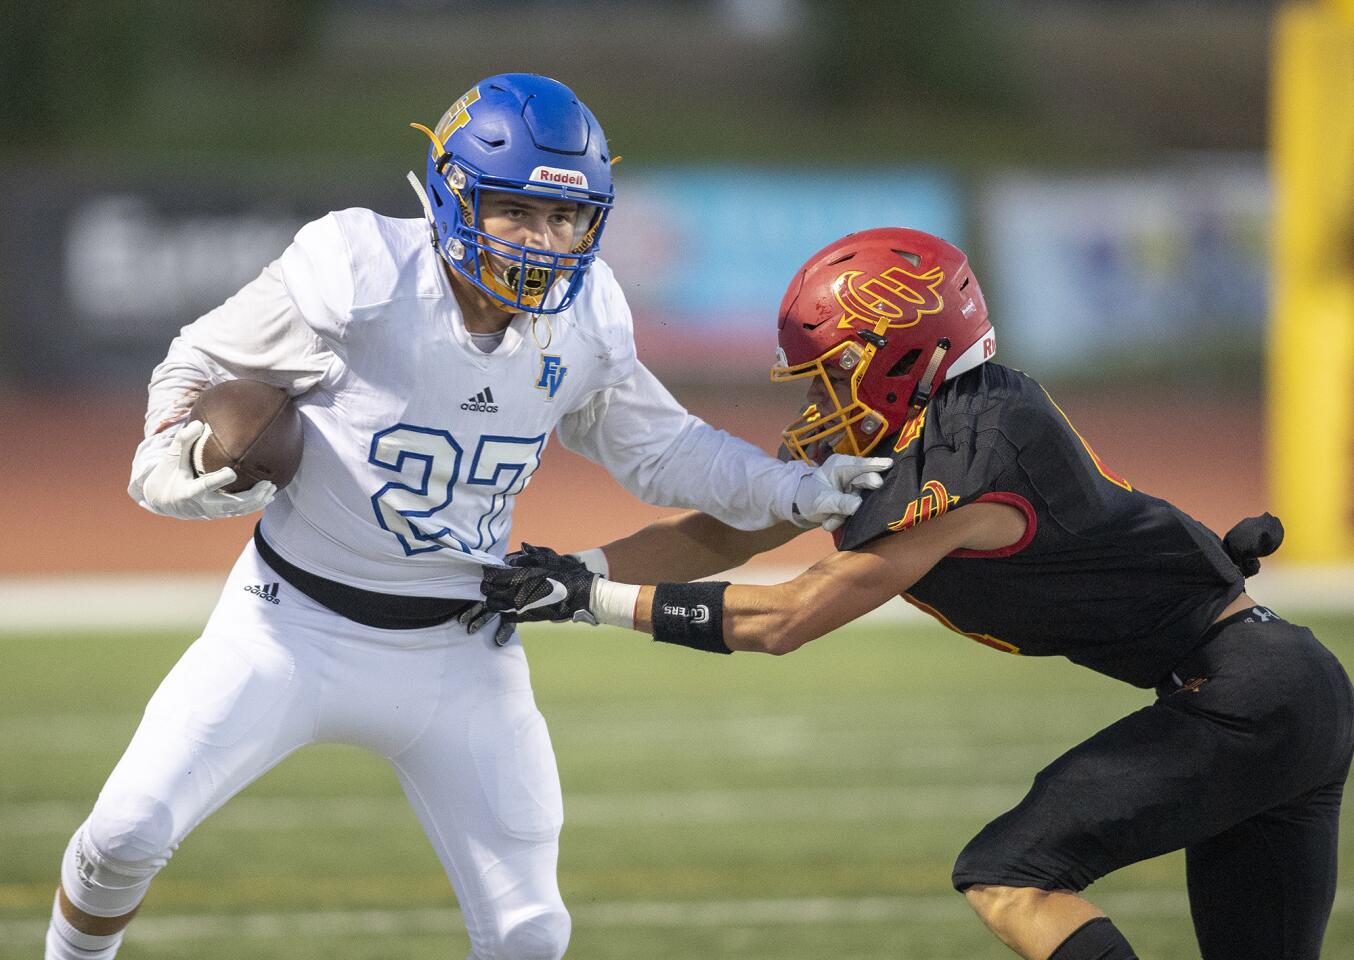 Woodbridge's Ezra Aguirre attempts to wrap up Fountain Valley's Brandon Krause during a nonleague game at University High School on Friday, August 31.